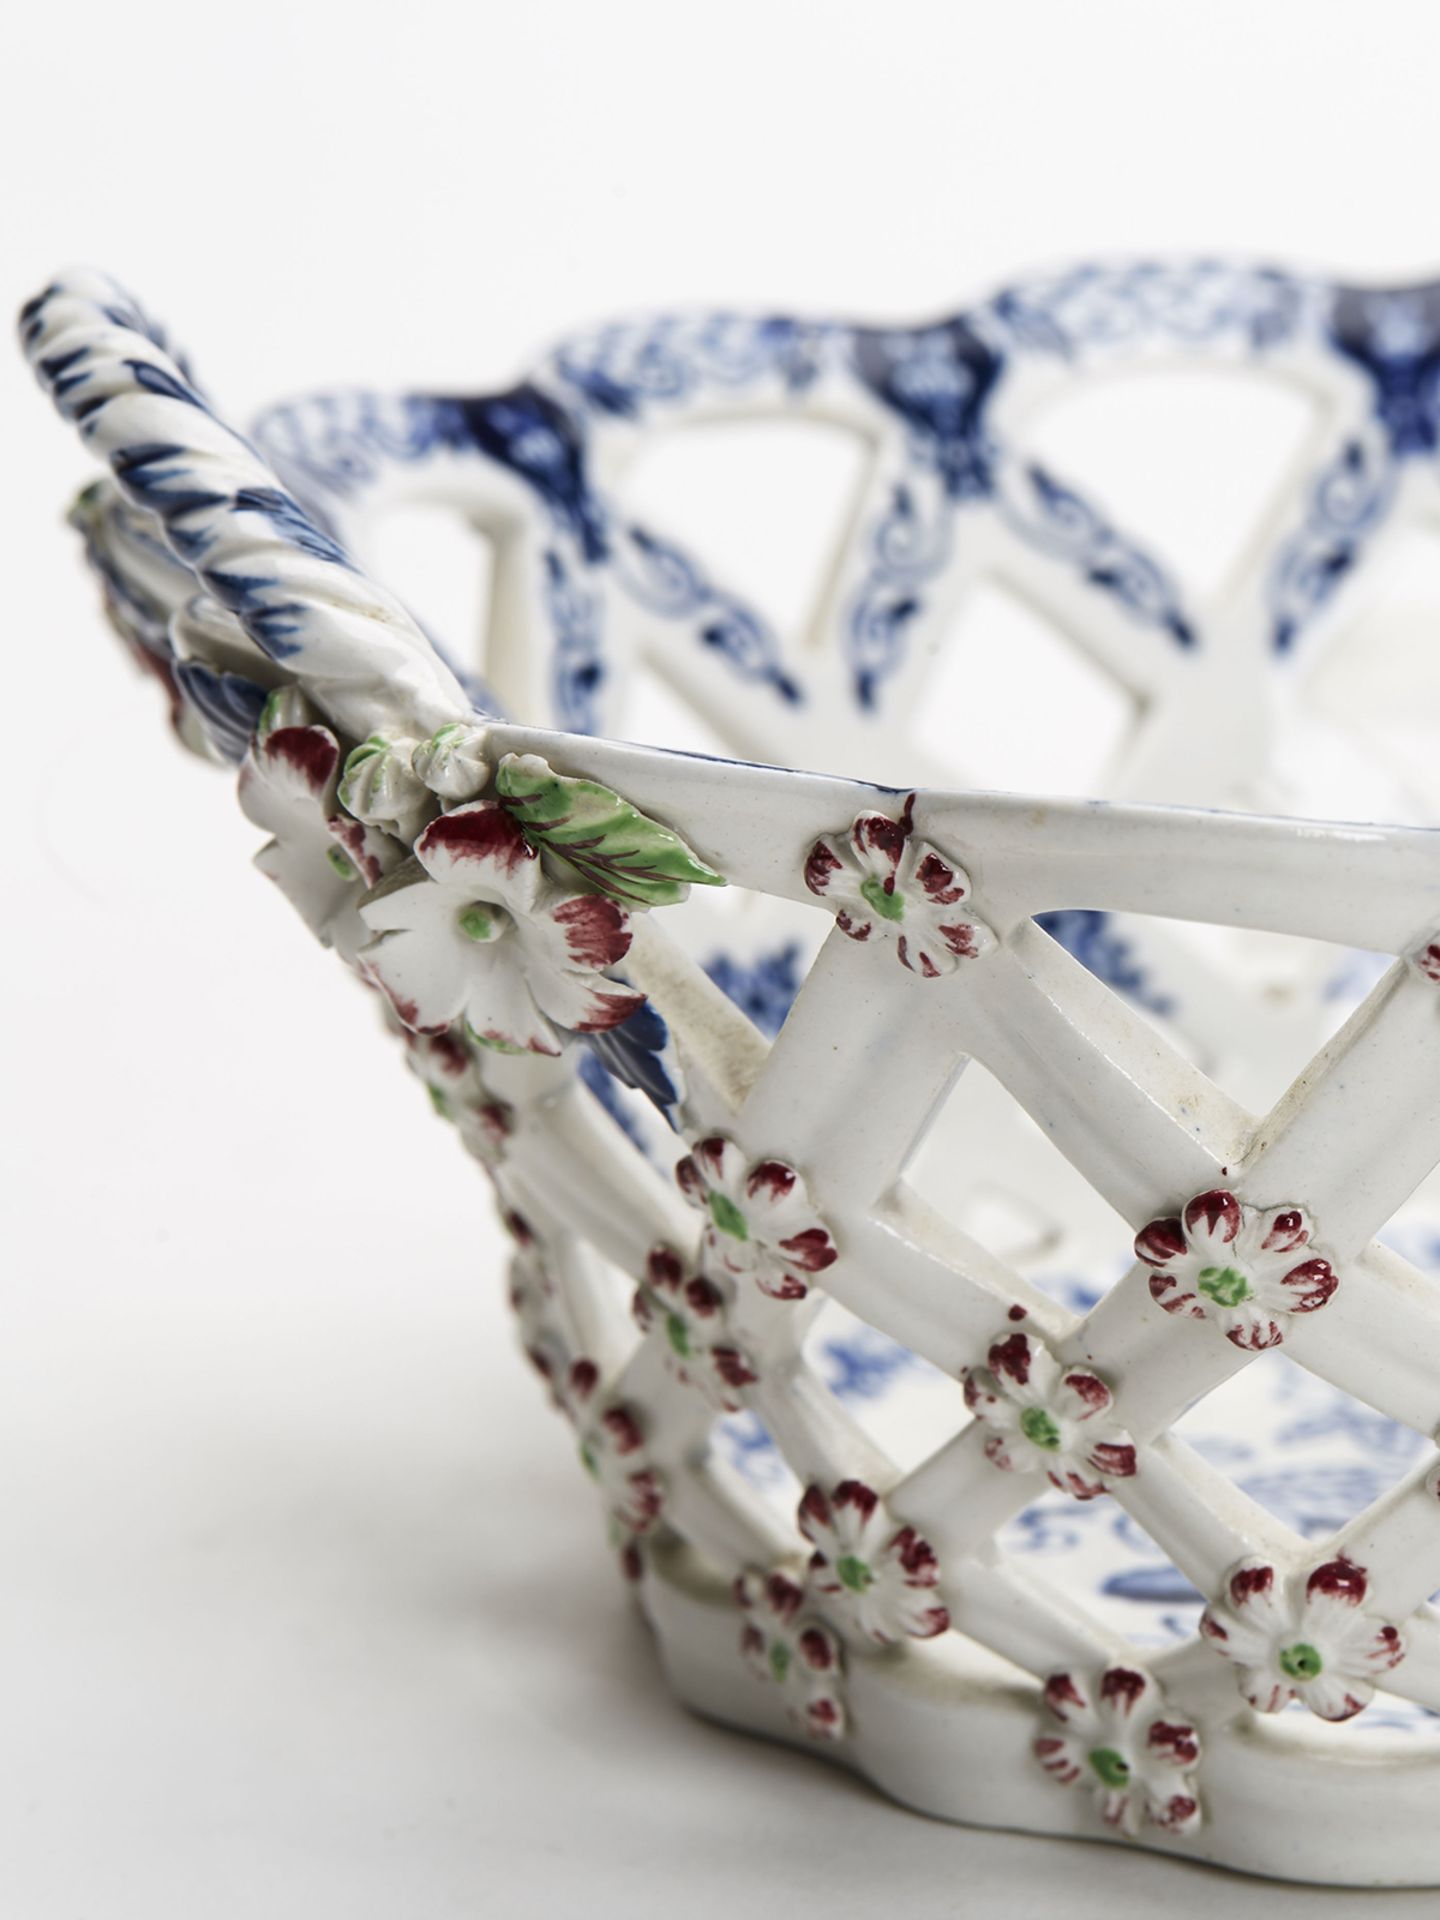 Antique Booths Worcester Blue & White Oval Basket 19Th C. - Image 5 of 8